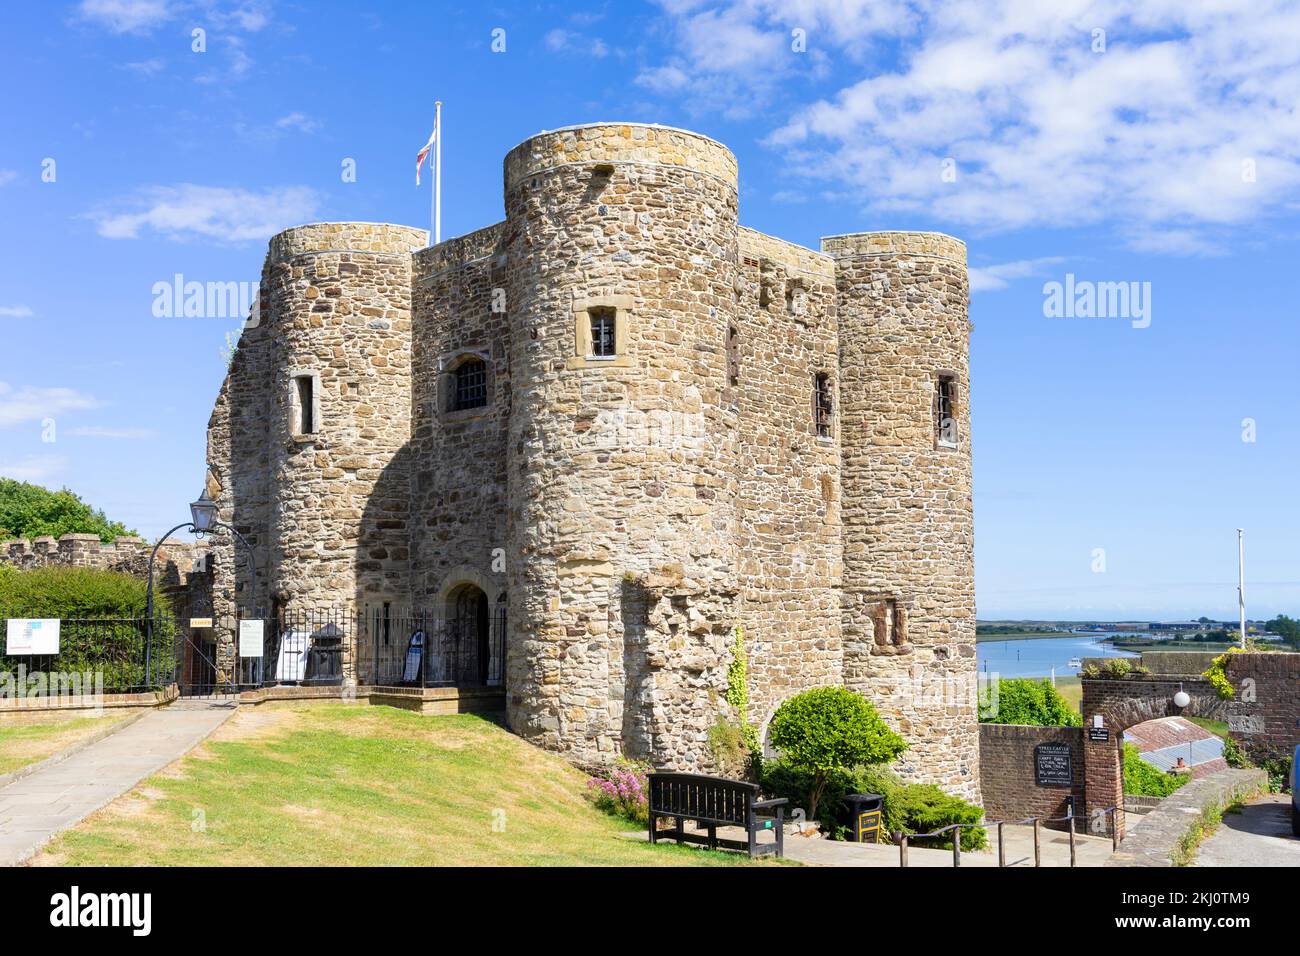 Rye Sussex il Museo del Castello di Rye o Ypres Tower nel Gungarden Rye East Sussex Inghilterra UK GB Europa Foto Stock